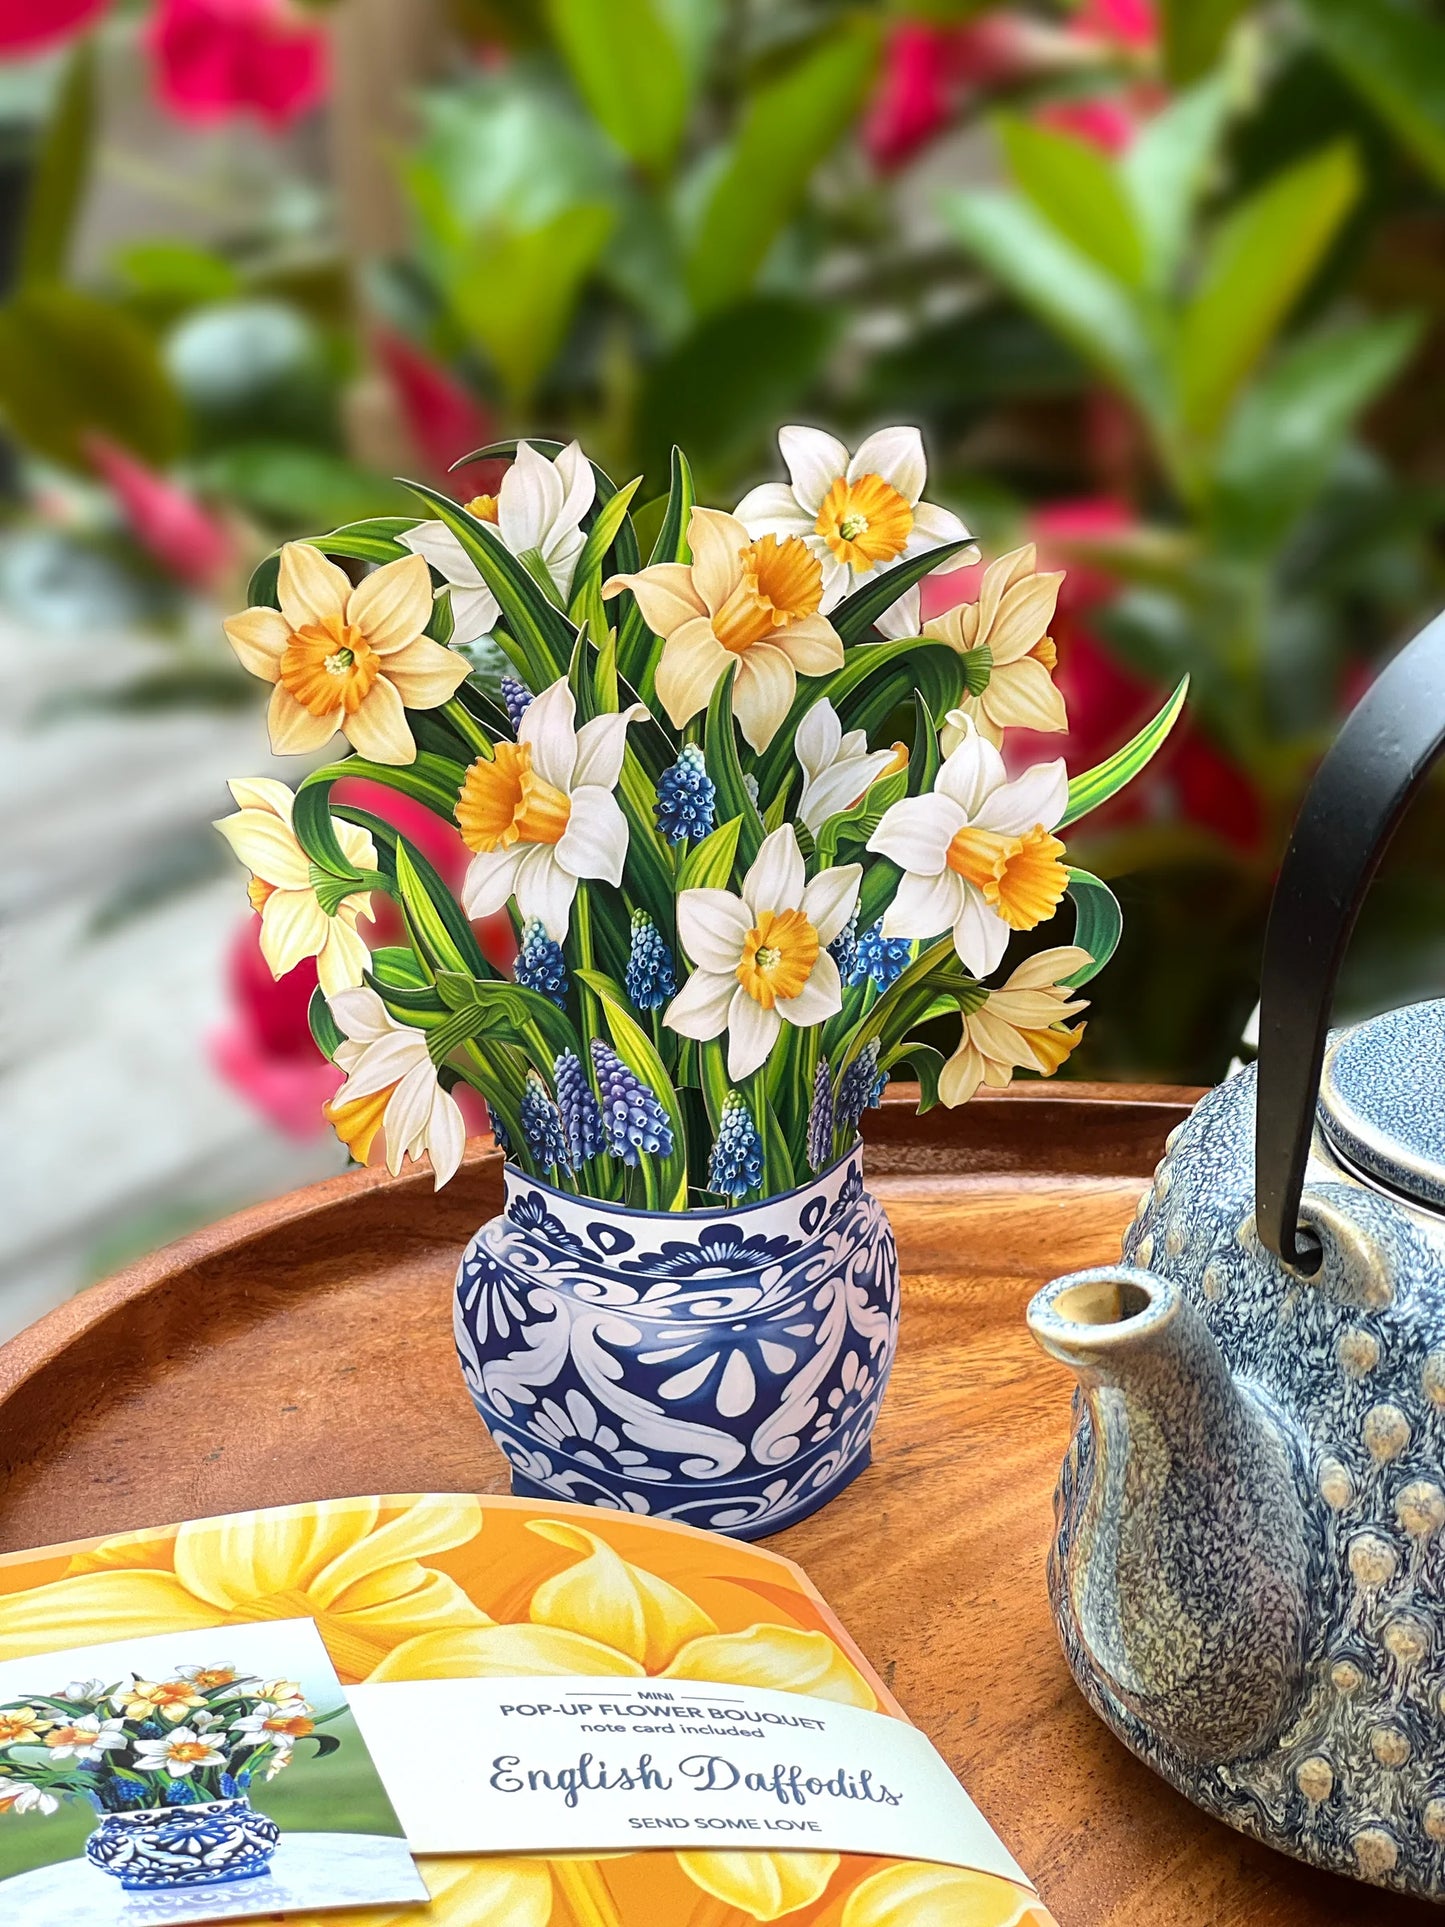 English Daffodils pop-up bouquet set on a table with a teapot next to it.